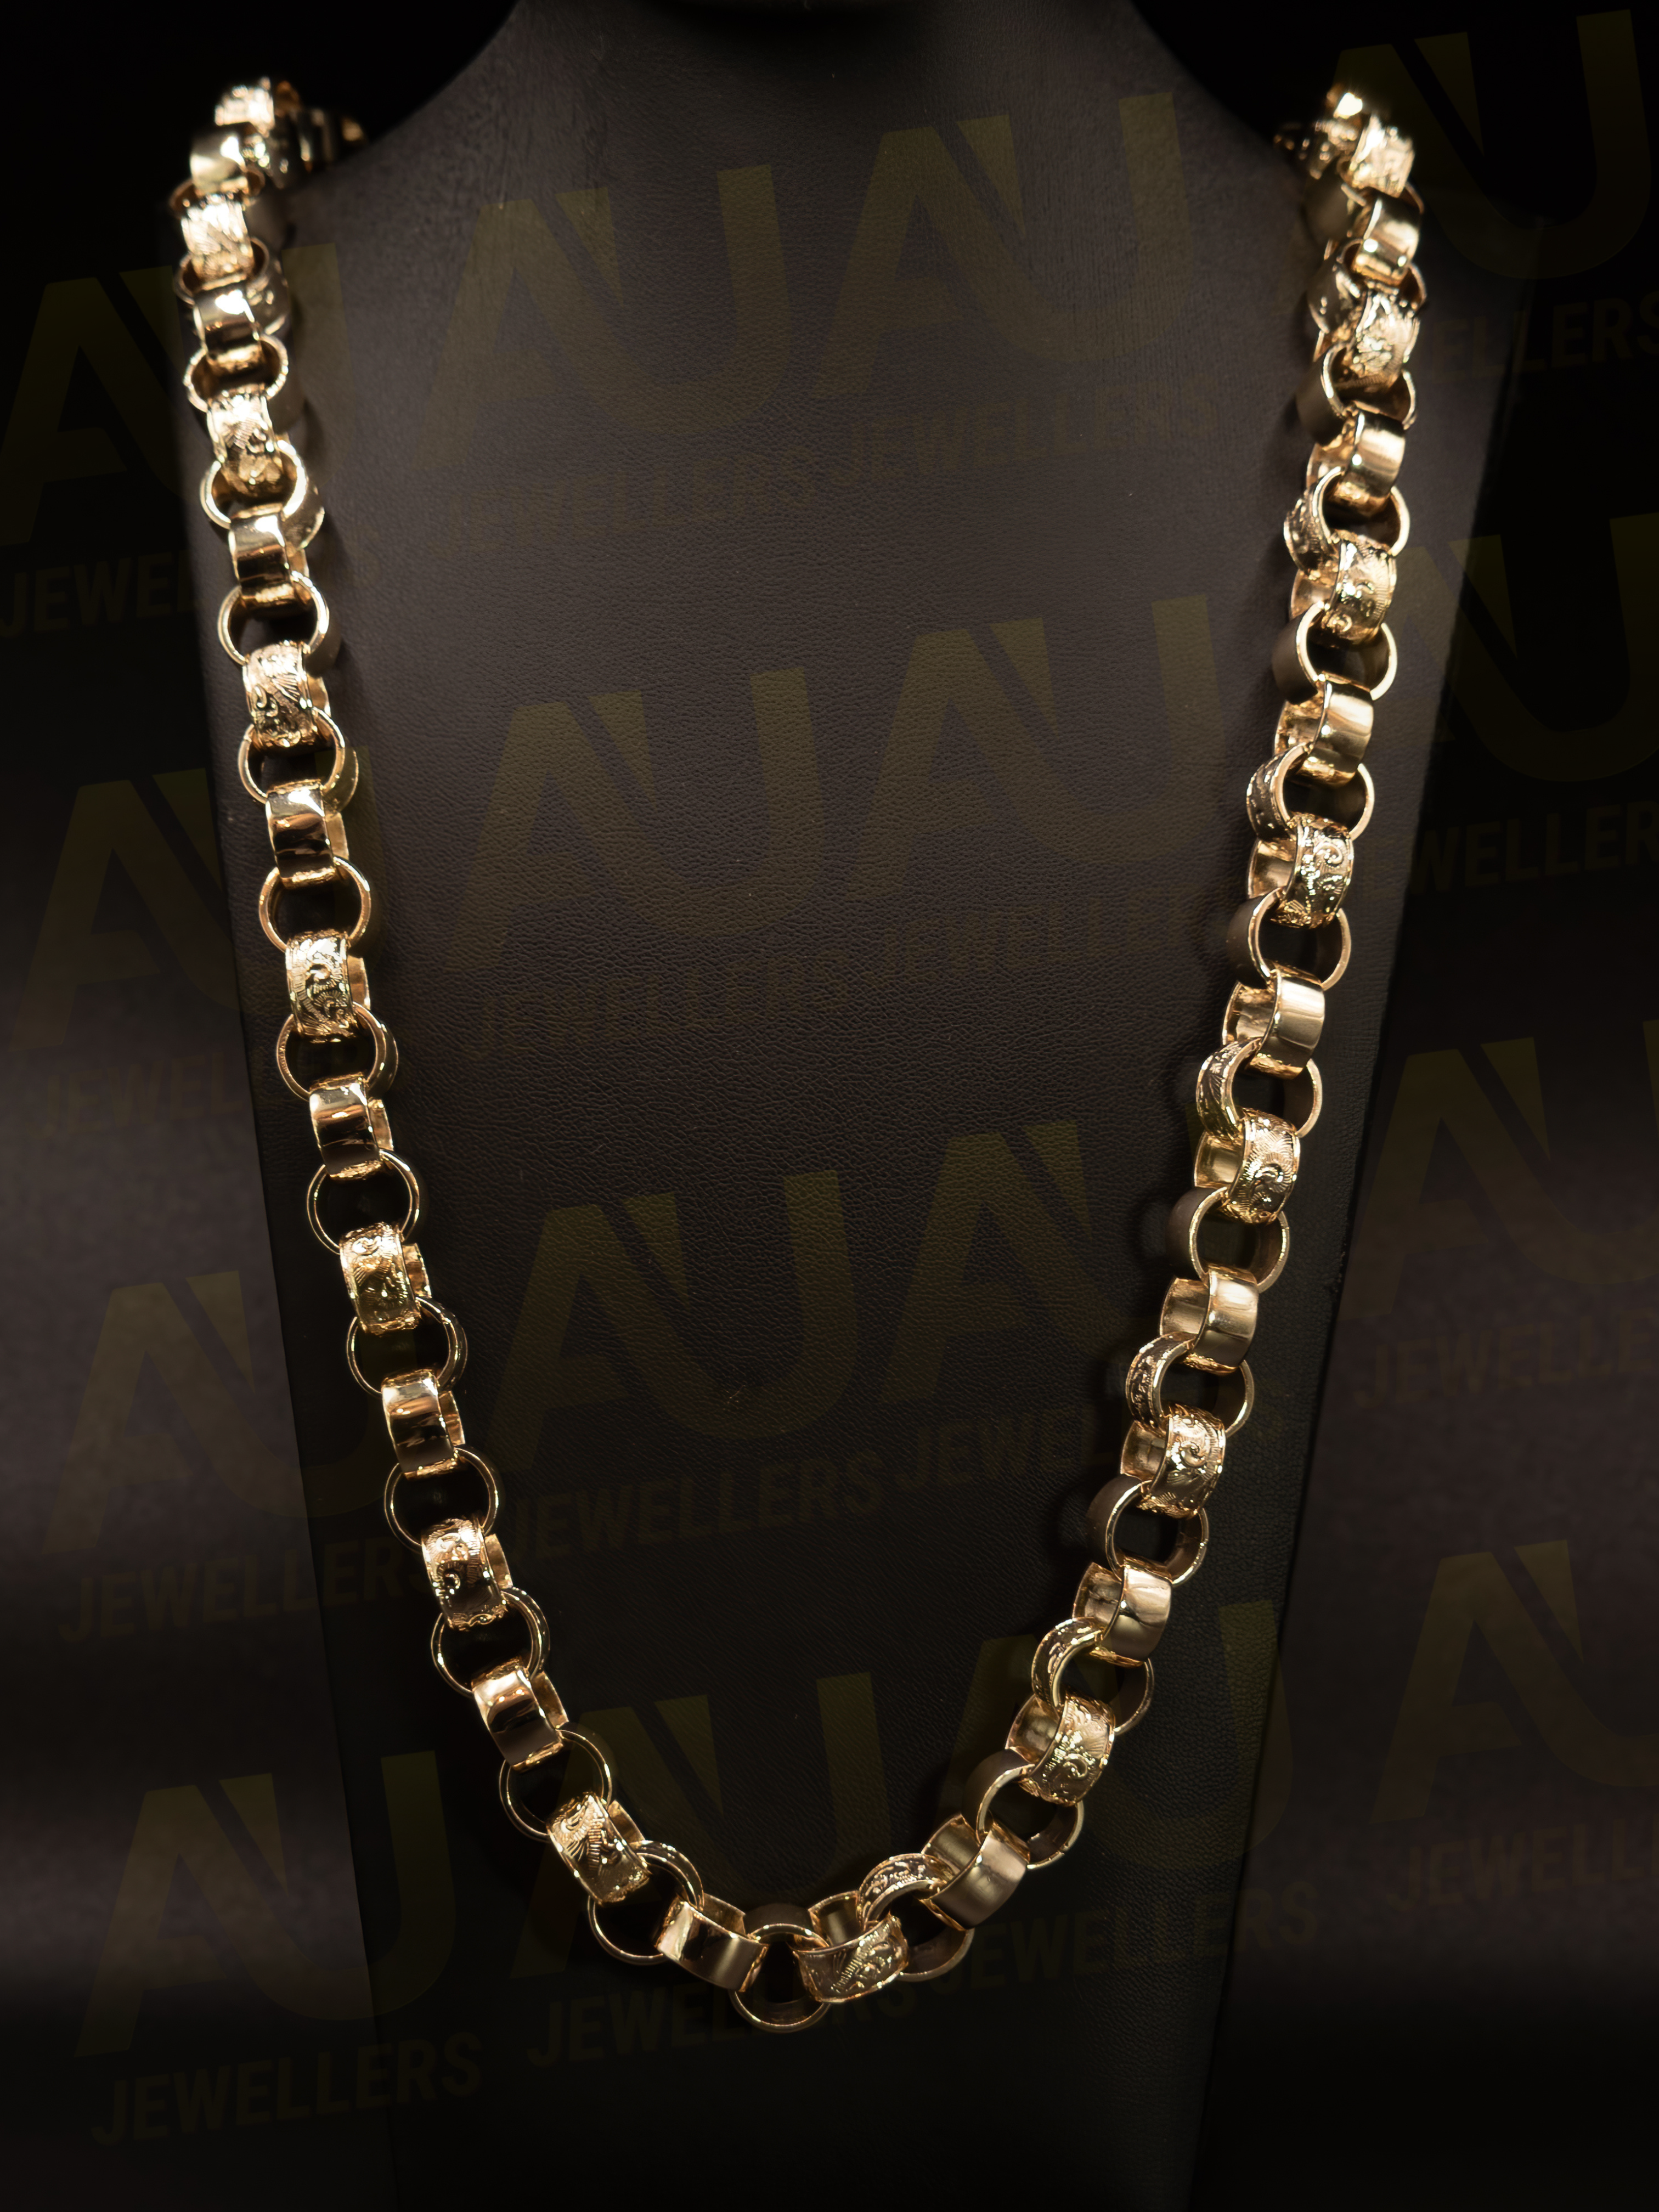 9ct Gold Filled Patterned Belcher Chain 14mm